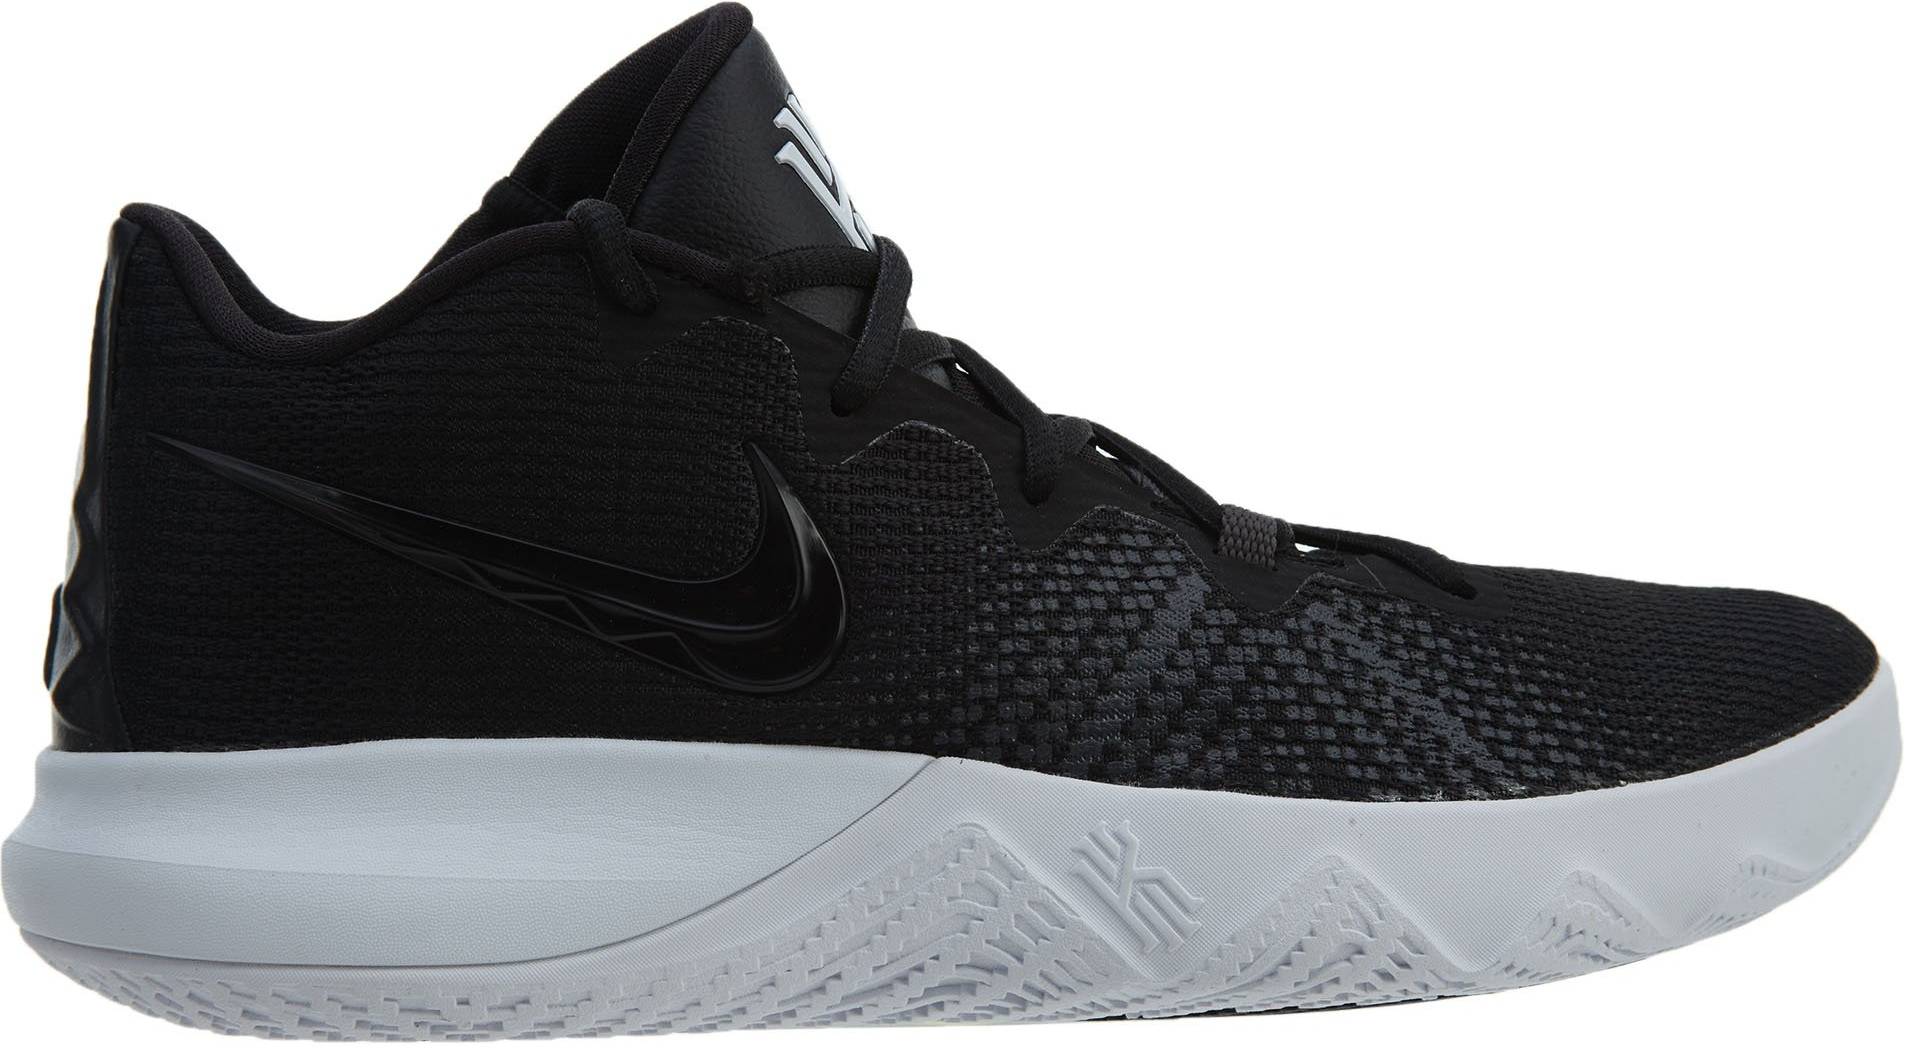 kyrie irving shoes all black